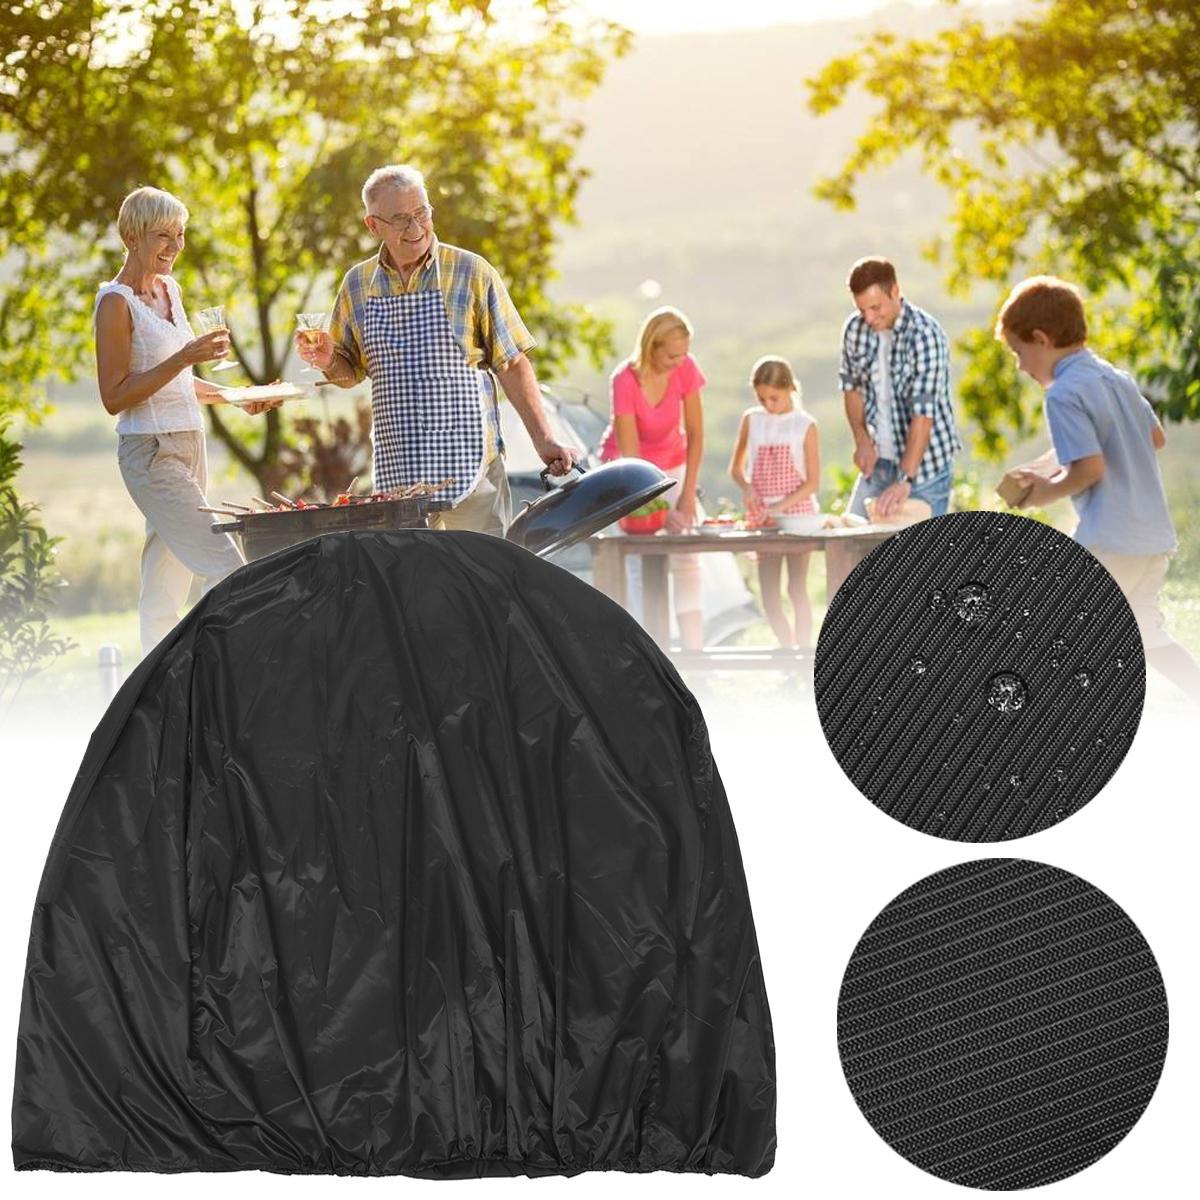 120x47.5x90cm BBQ Grill Cover Outdoor Picnic Waterproof Dust Rain UV Proof Protector Barbeque Accessories